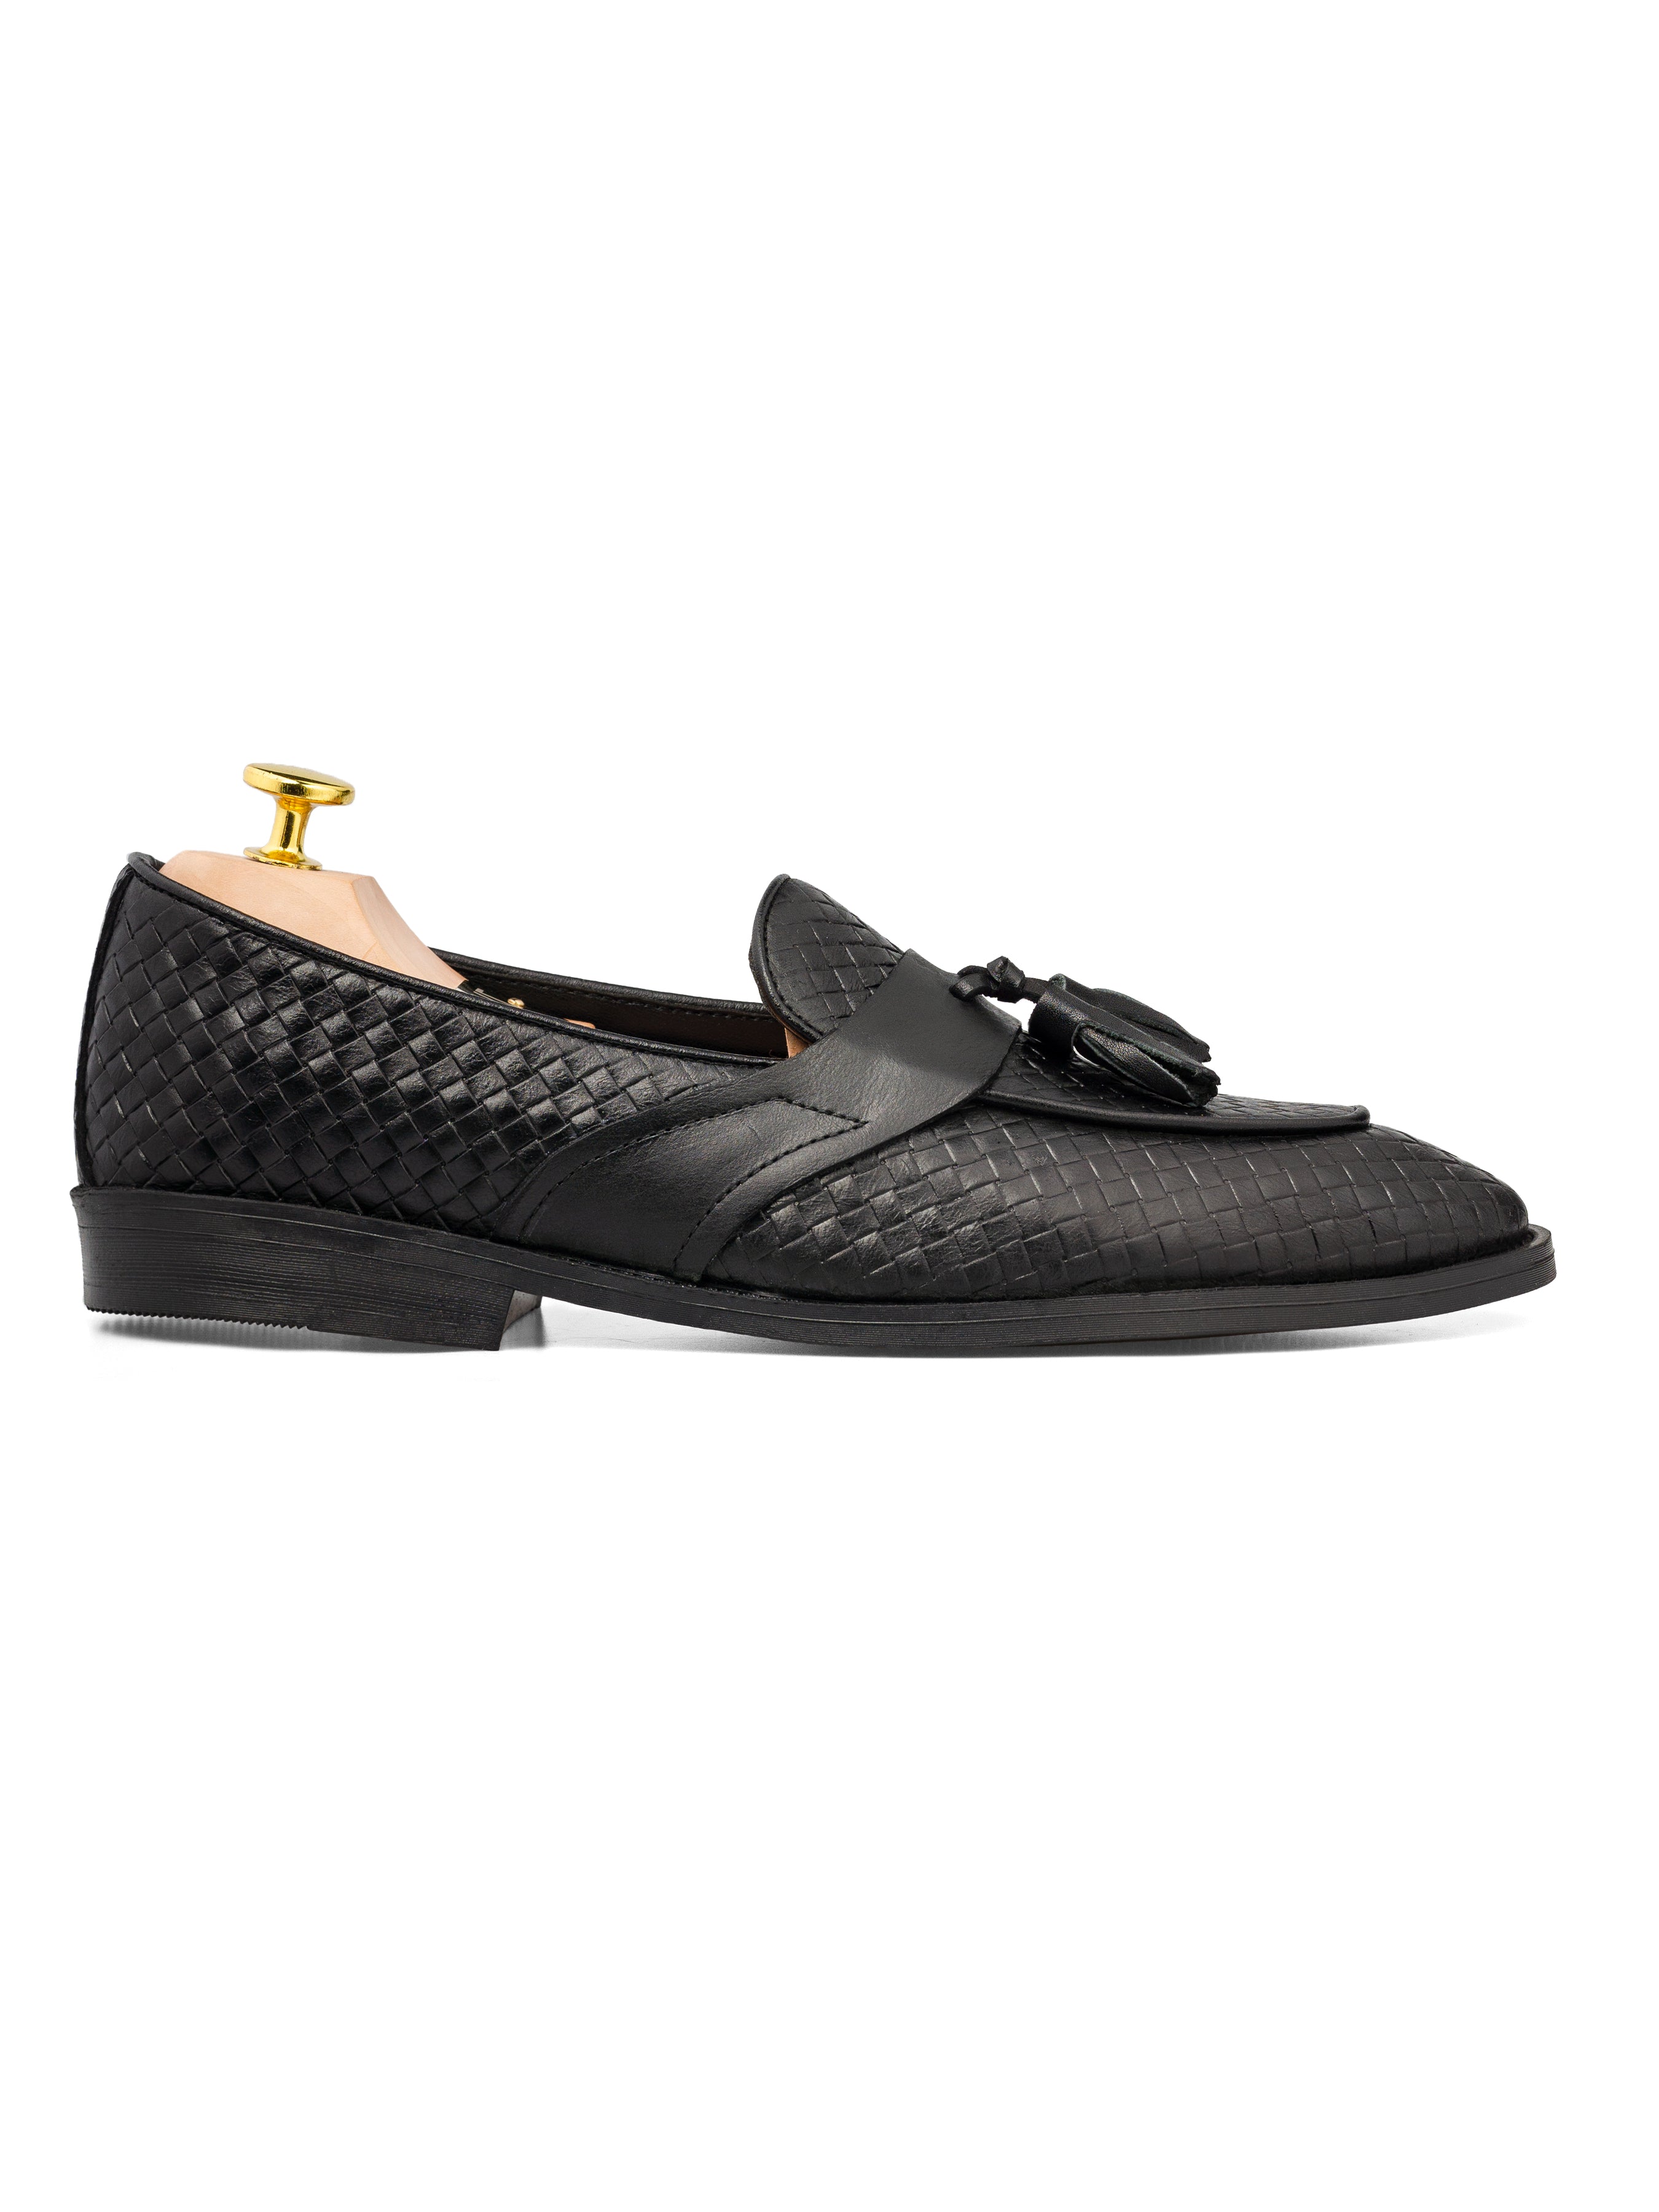 Belgian Loafer Tassel - Black Woven Leather with Solid Strap (Flexi Sole)